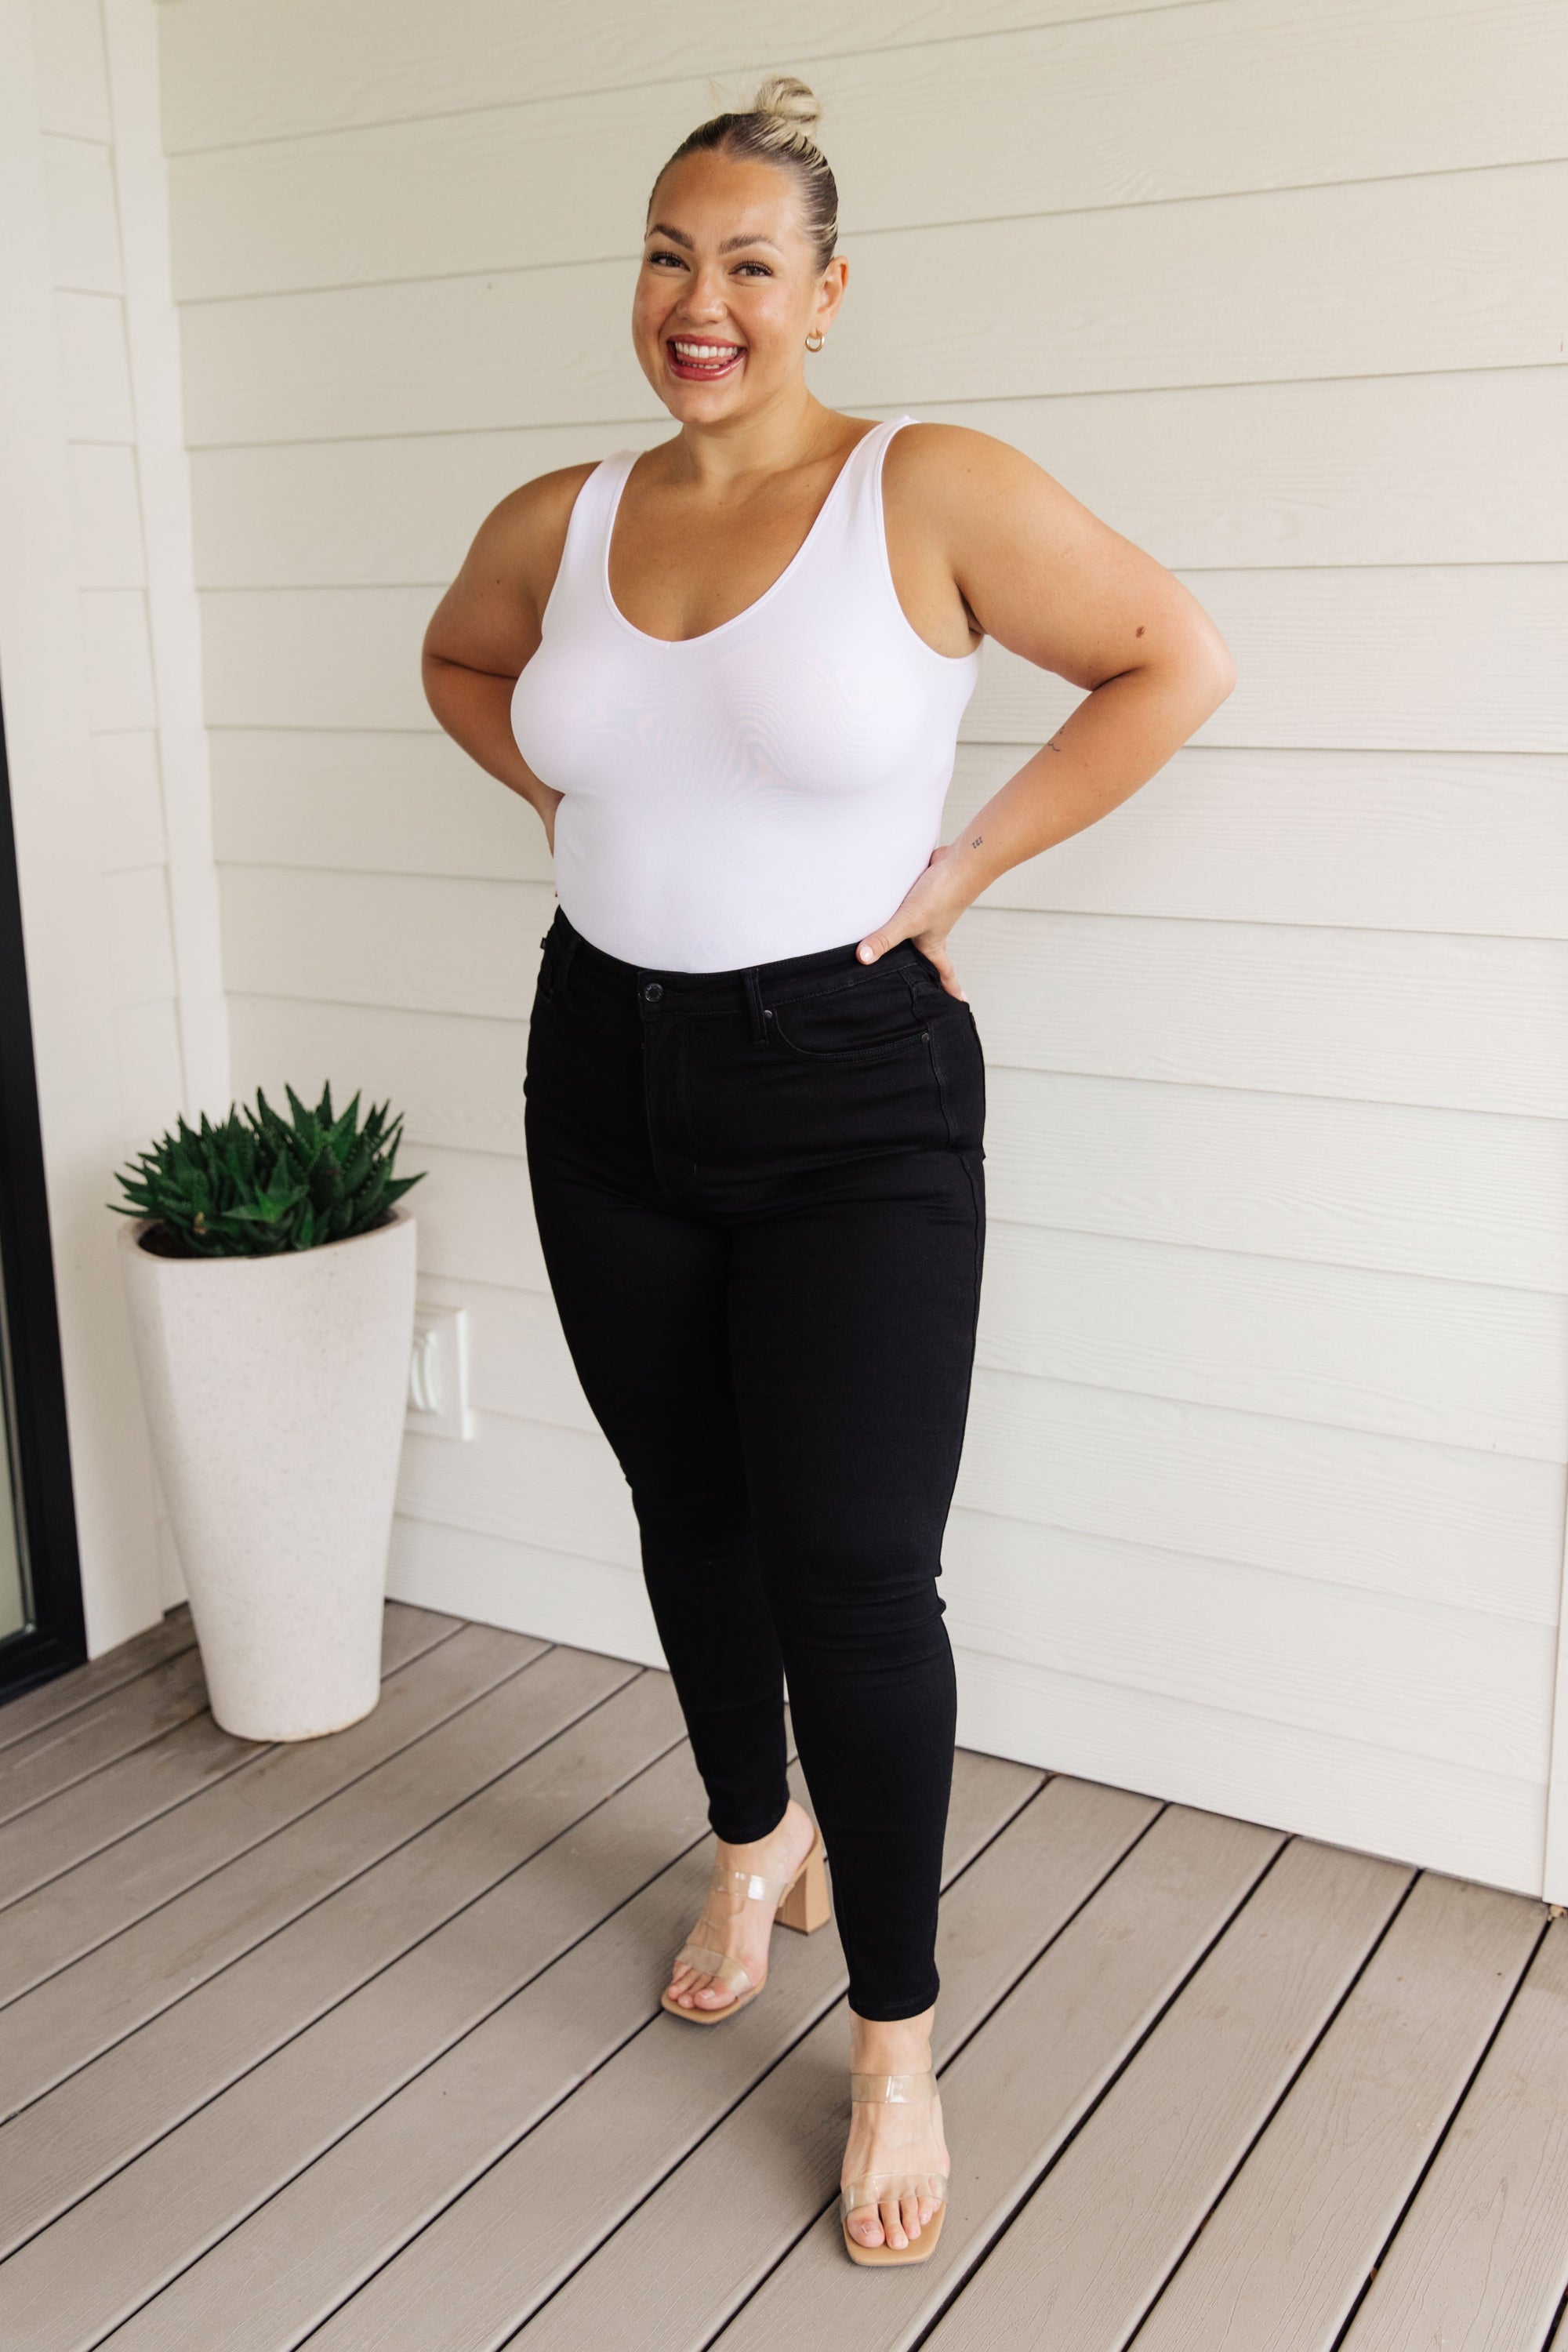 Judy Blue Jeans  Plus Size Black High Rise Tummy Control Top